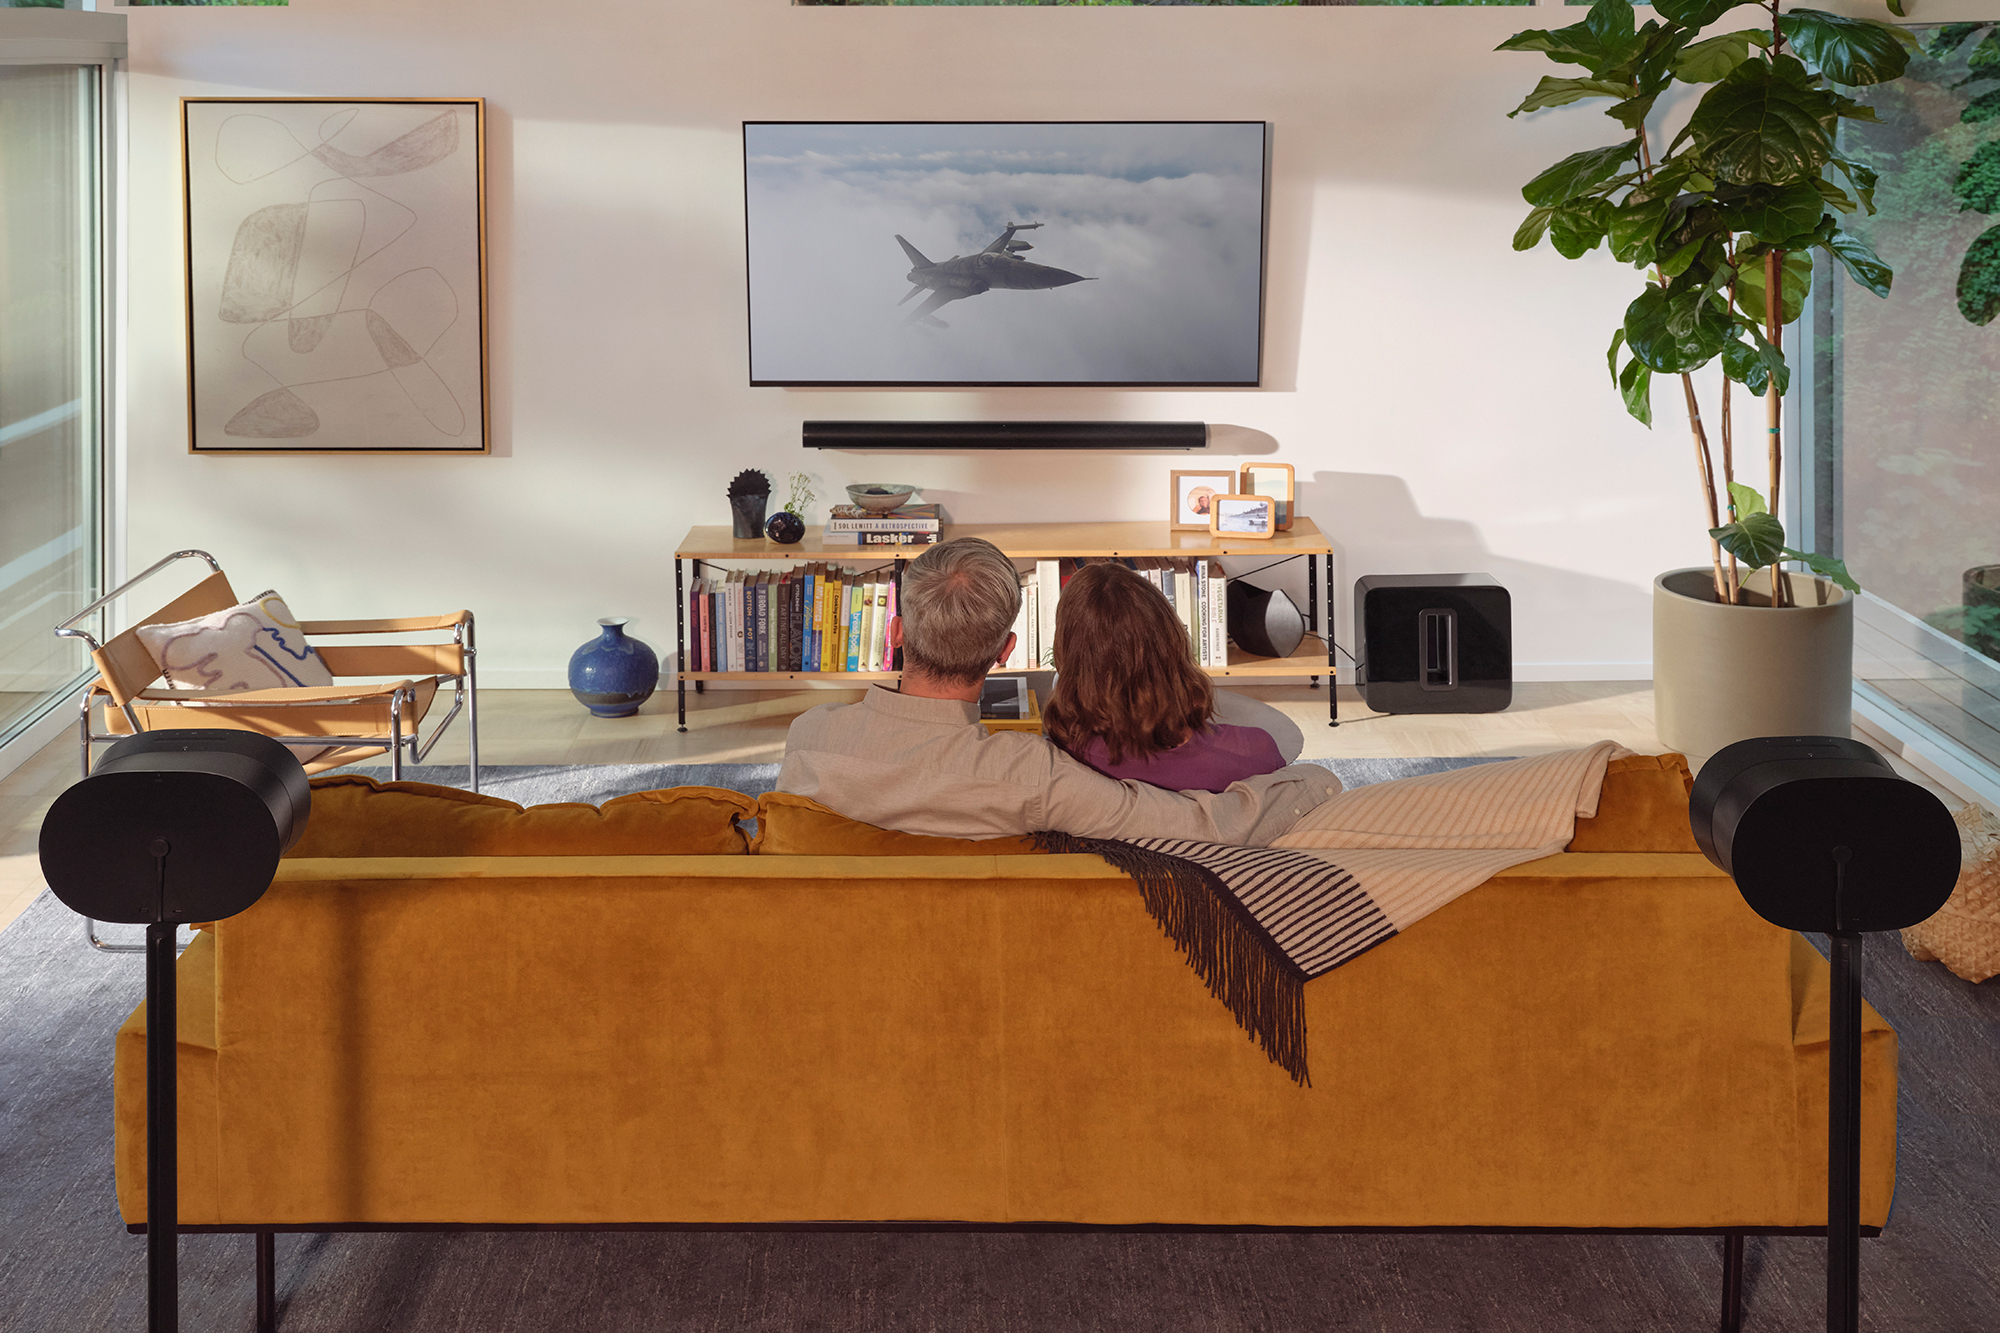 This Totally Wireless TV Sounds Like a Dream, Except for One Big